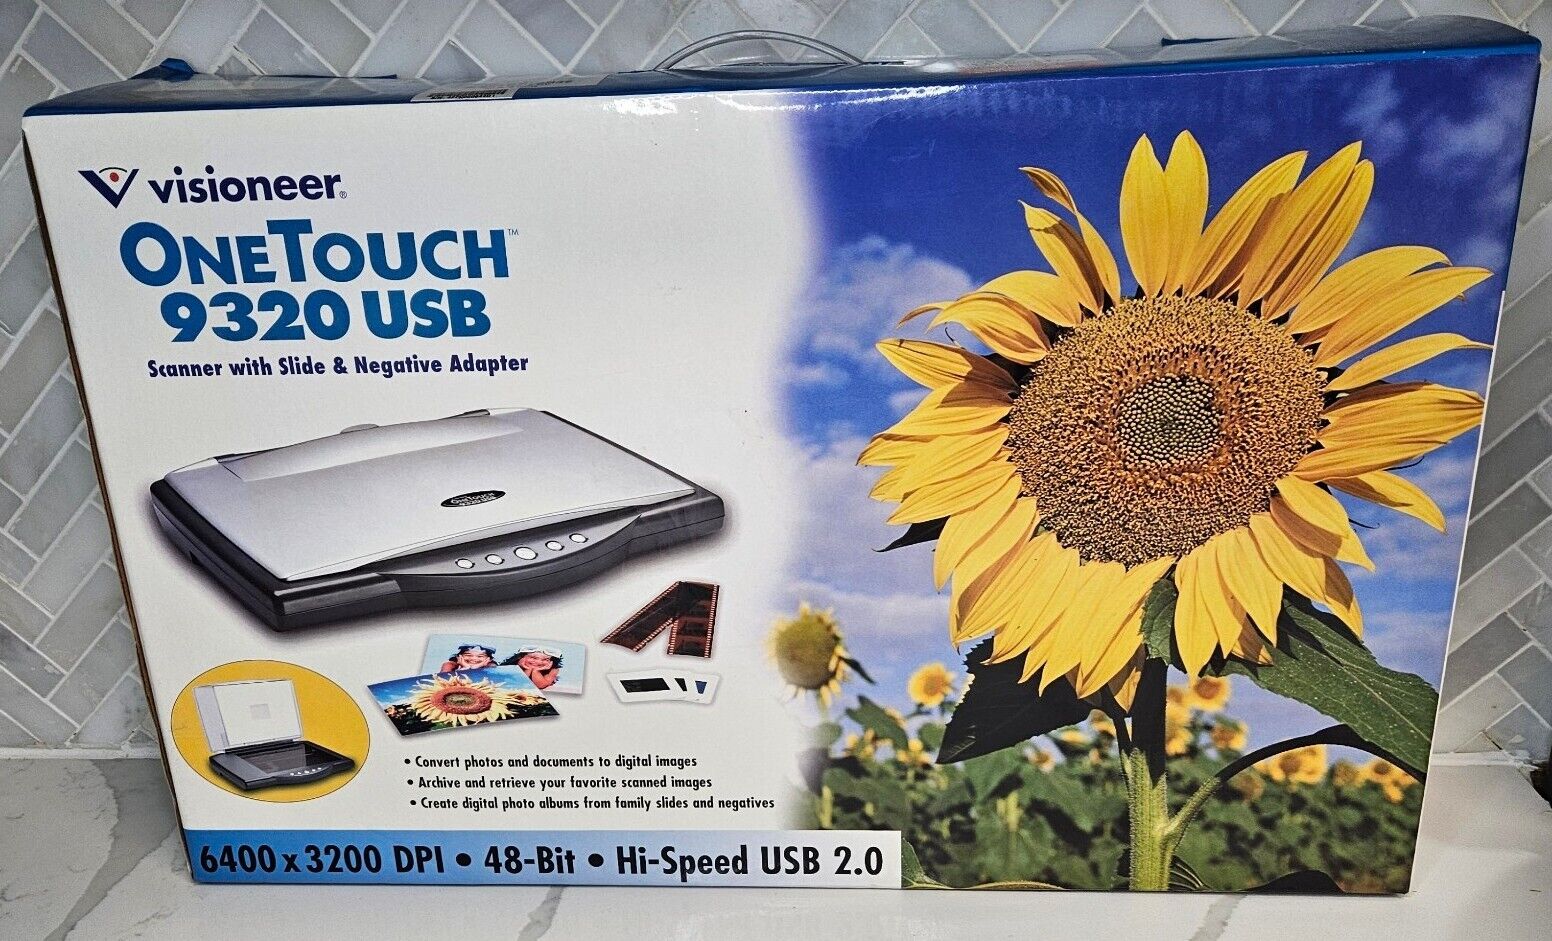 NEW Visioneer One Touch 9320 USB Flatbed Scanner w/ Slide & Negative Adapter